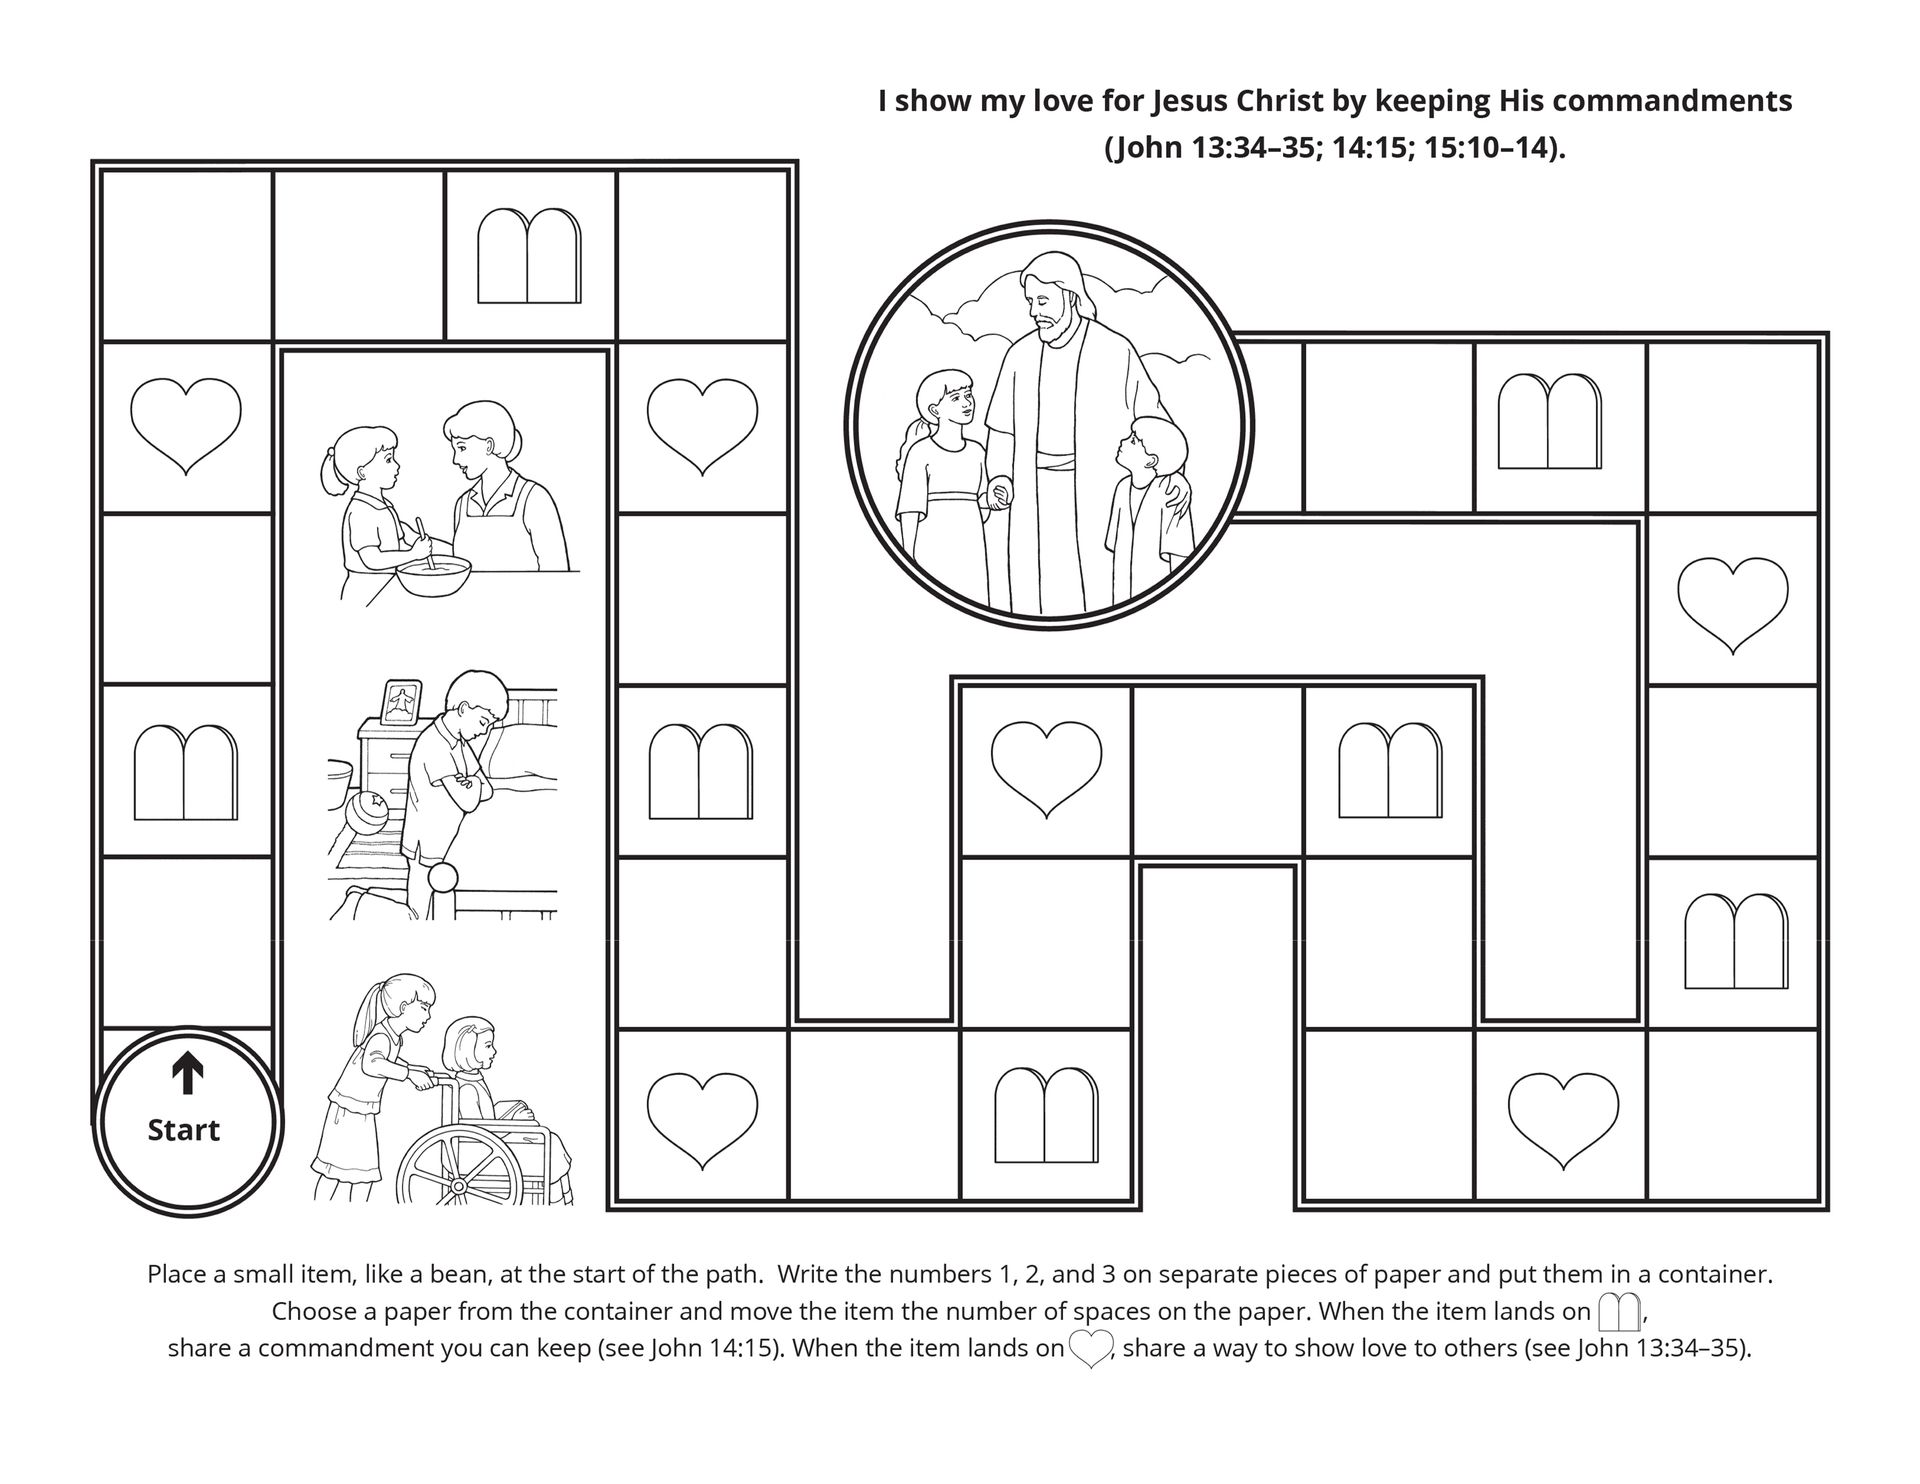 A Primary activity game about keeping the commandments.